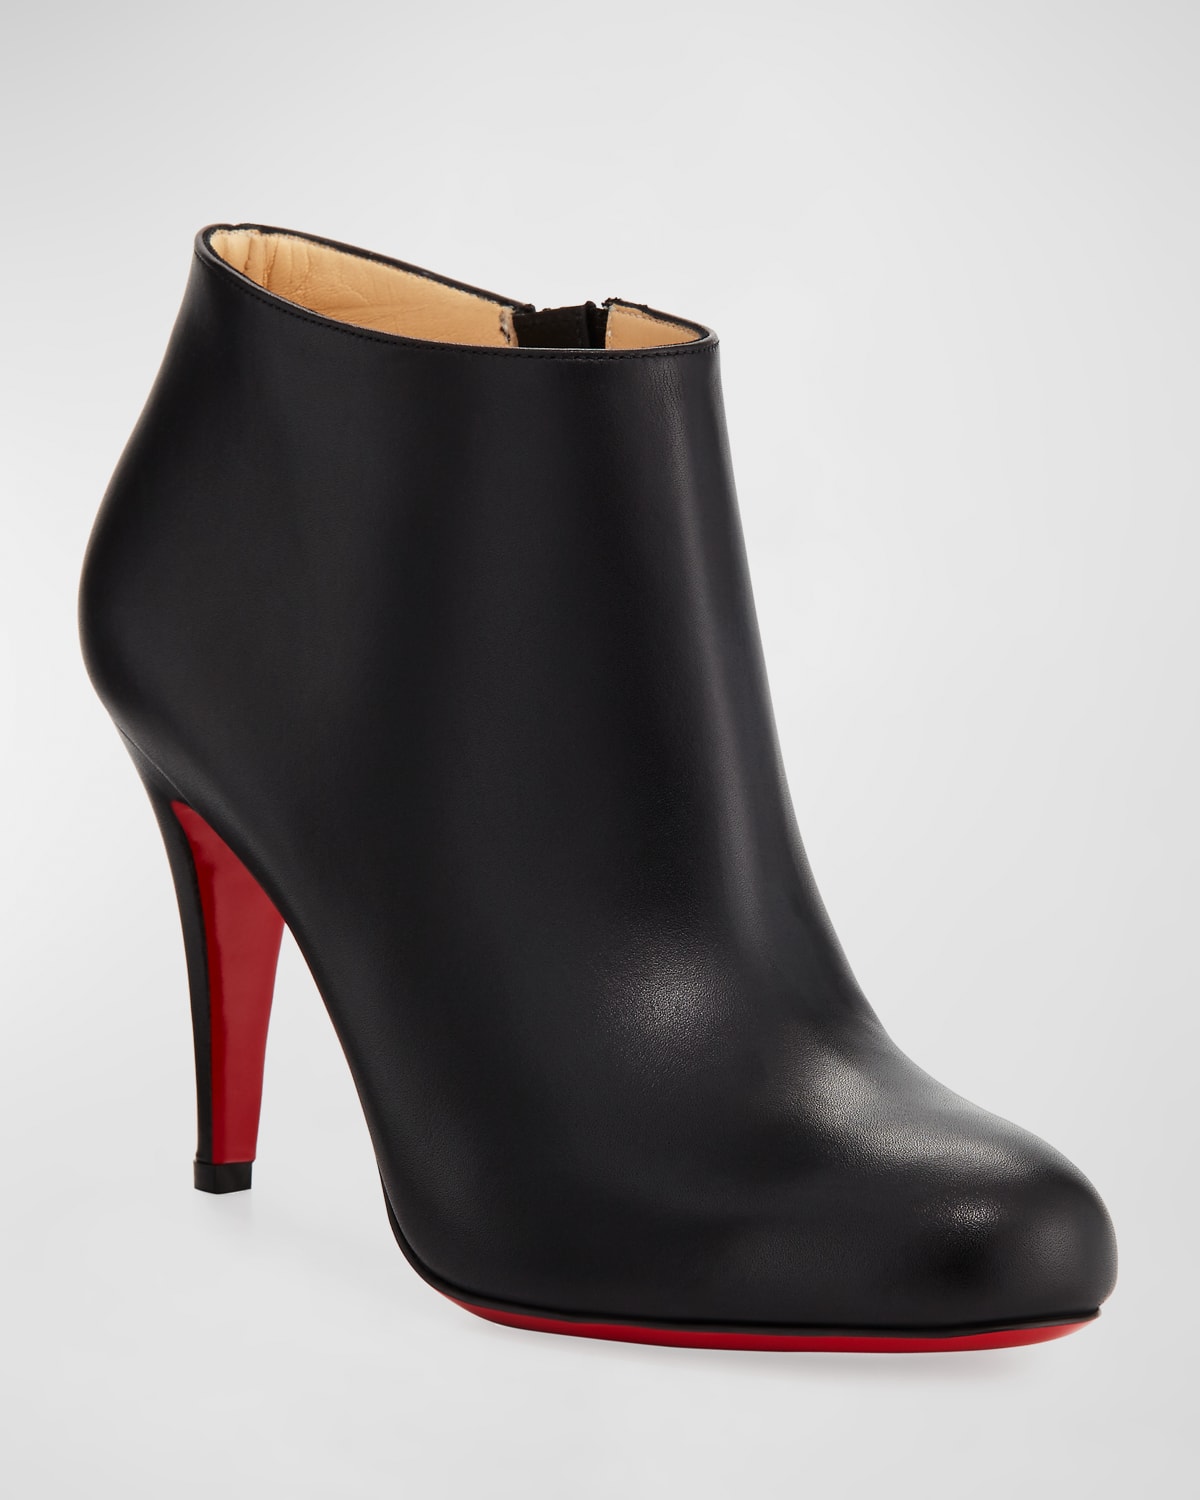 Christian Louboutin Pumppie Botta Red Sole Suede Knee-High Boots ...